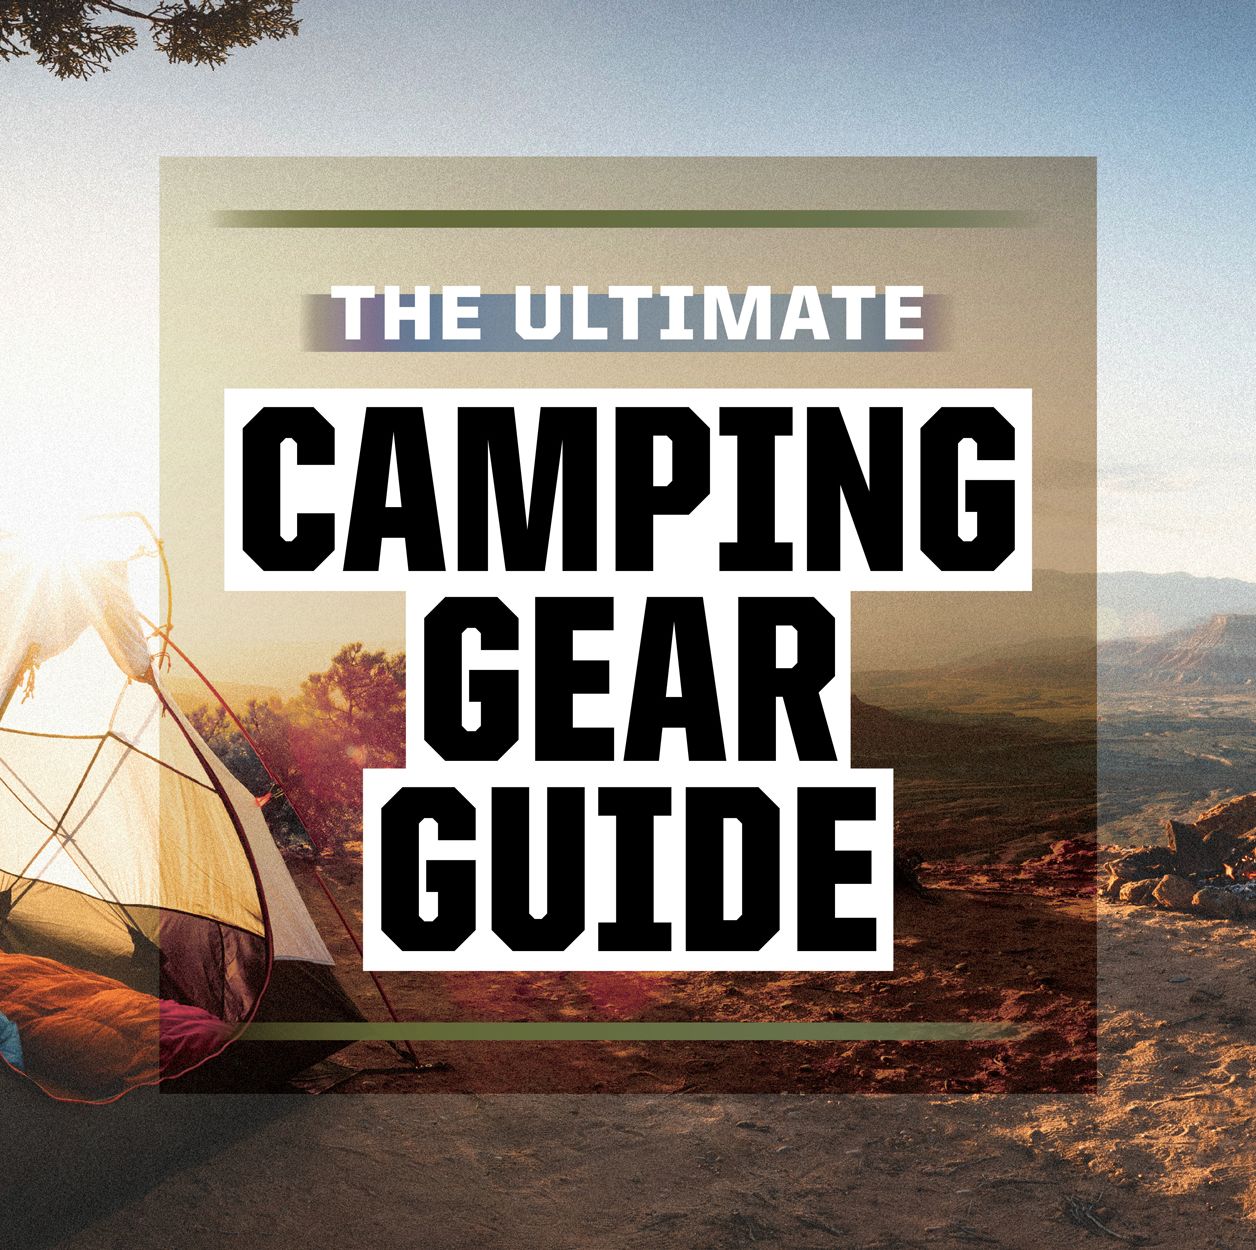 The Ultimate Camping Gear Guide